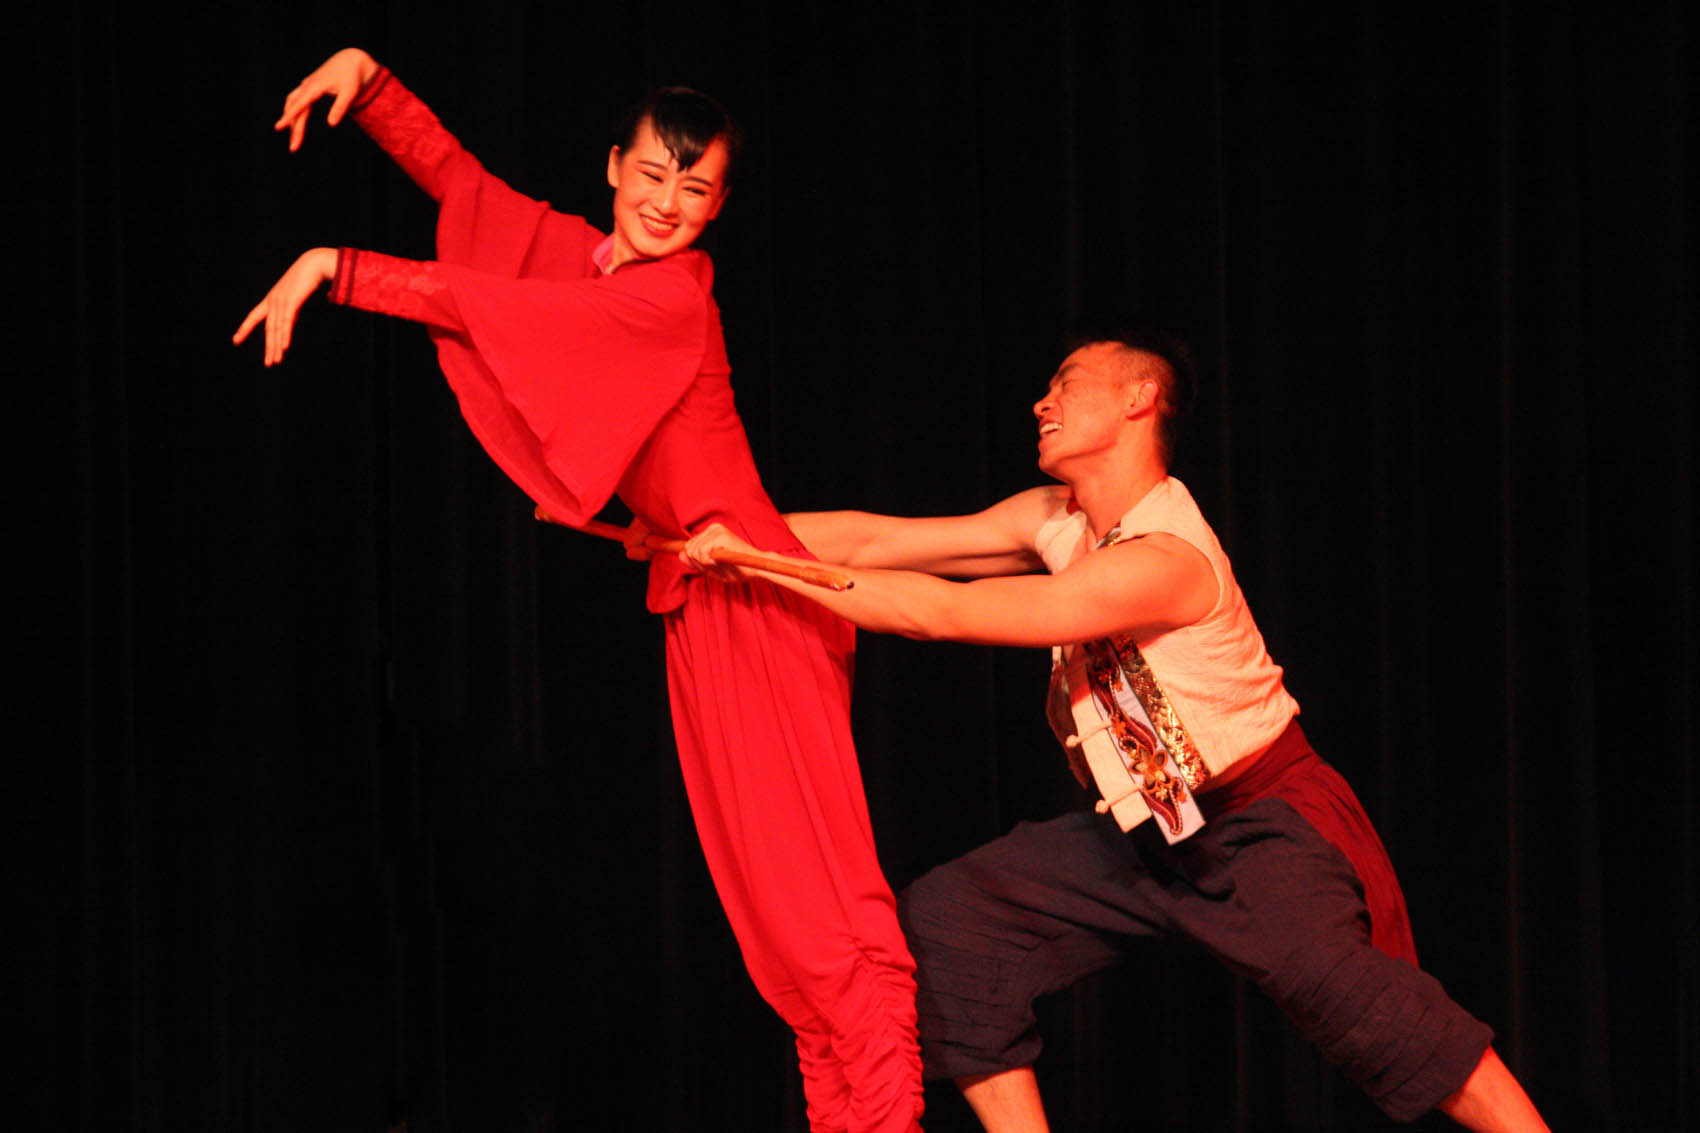 Click to enlarge,  Hu Xuedong, left, and Yang Yijie perform a dance duet, "Red Sorghum," as part of a lively afternoon of dance and music presented by artists from Shanxi University in China. 